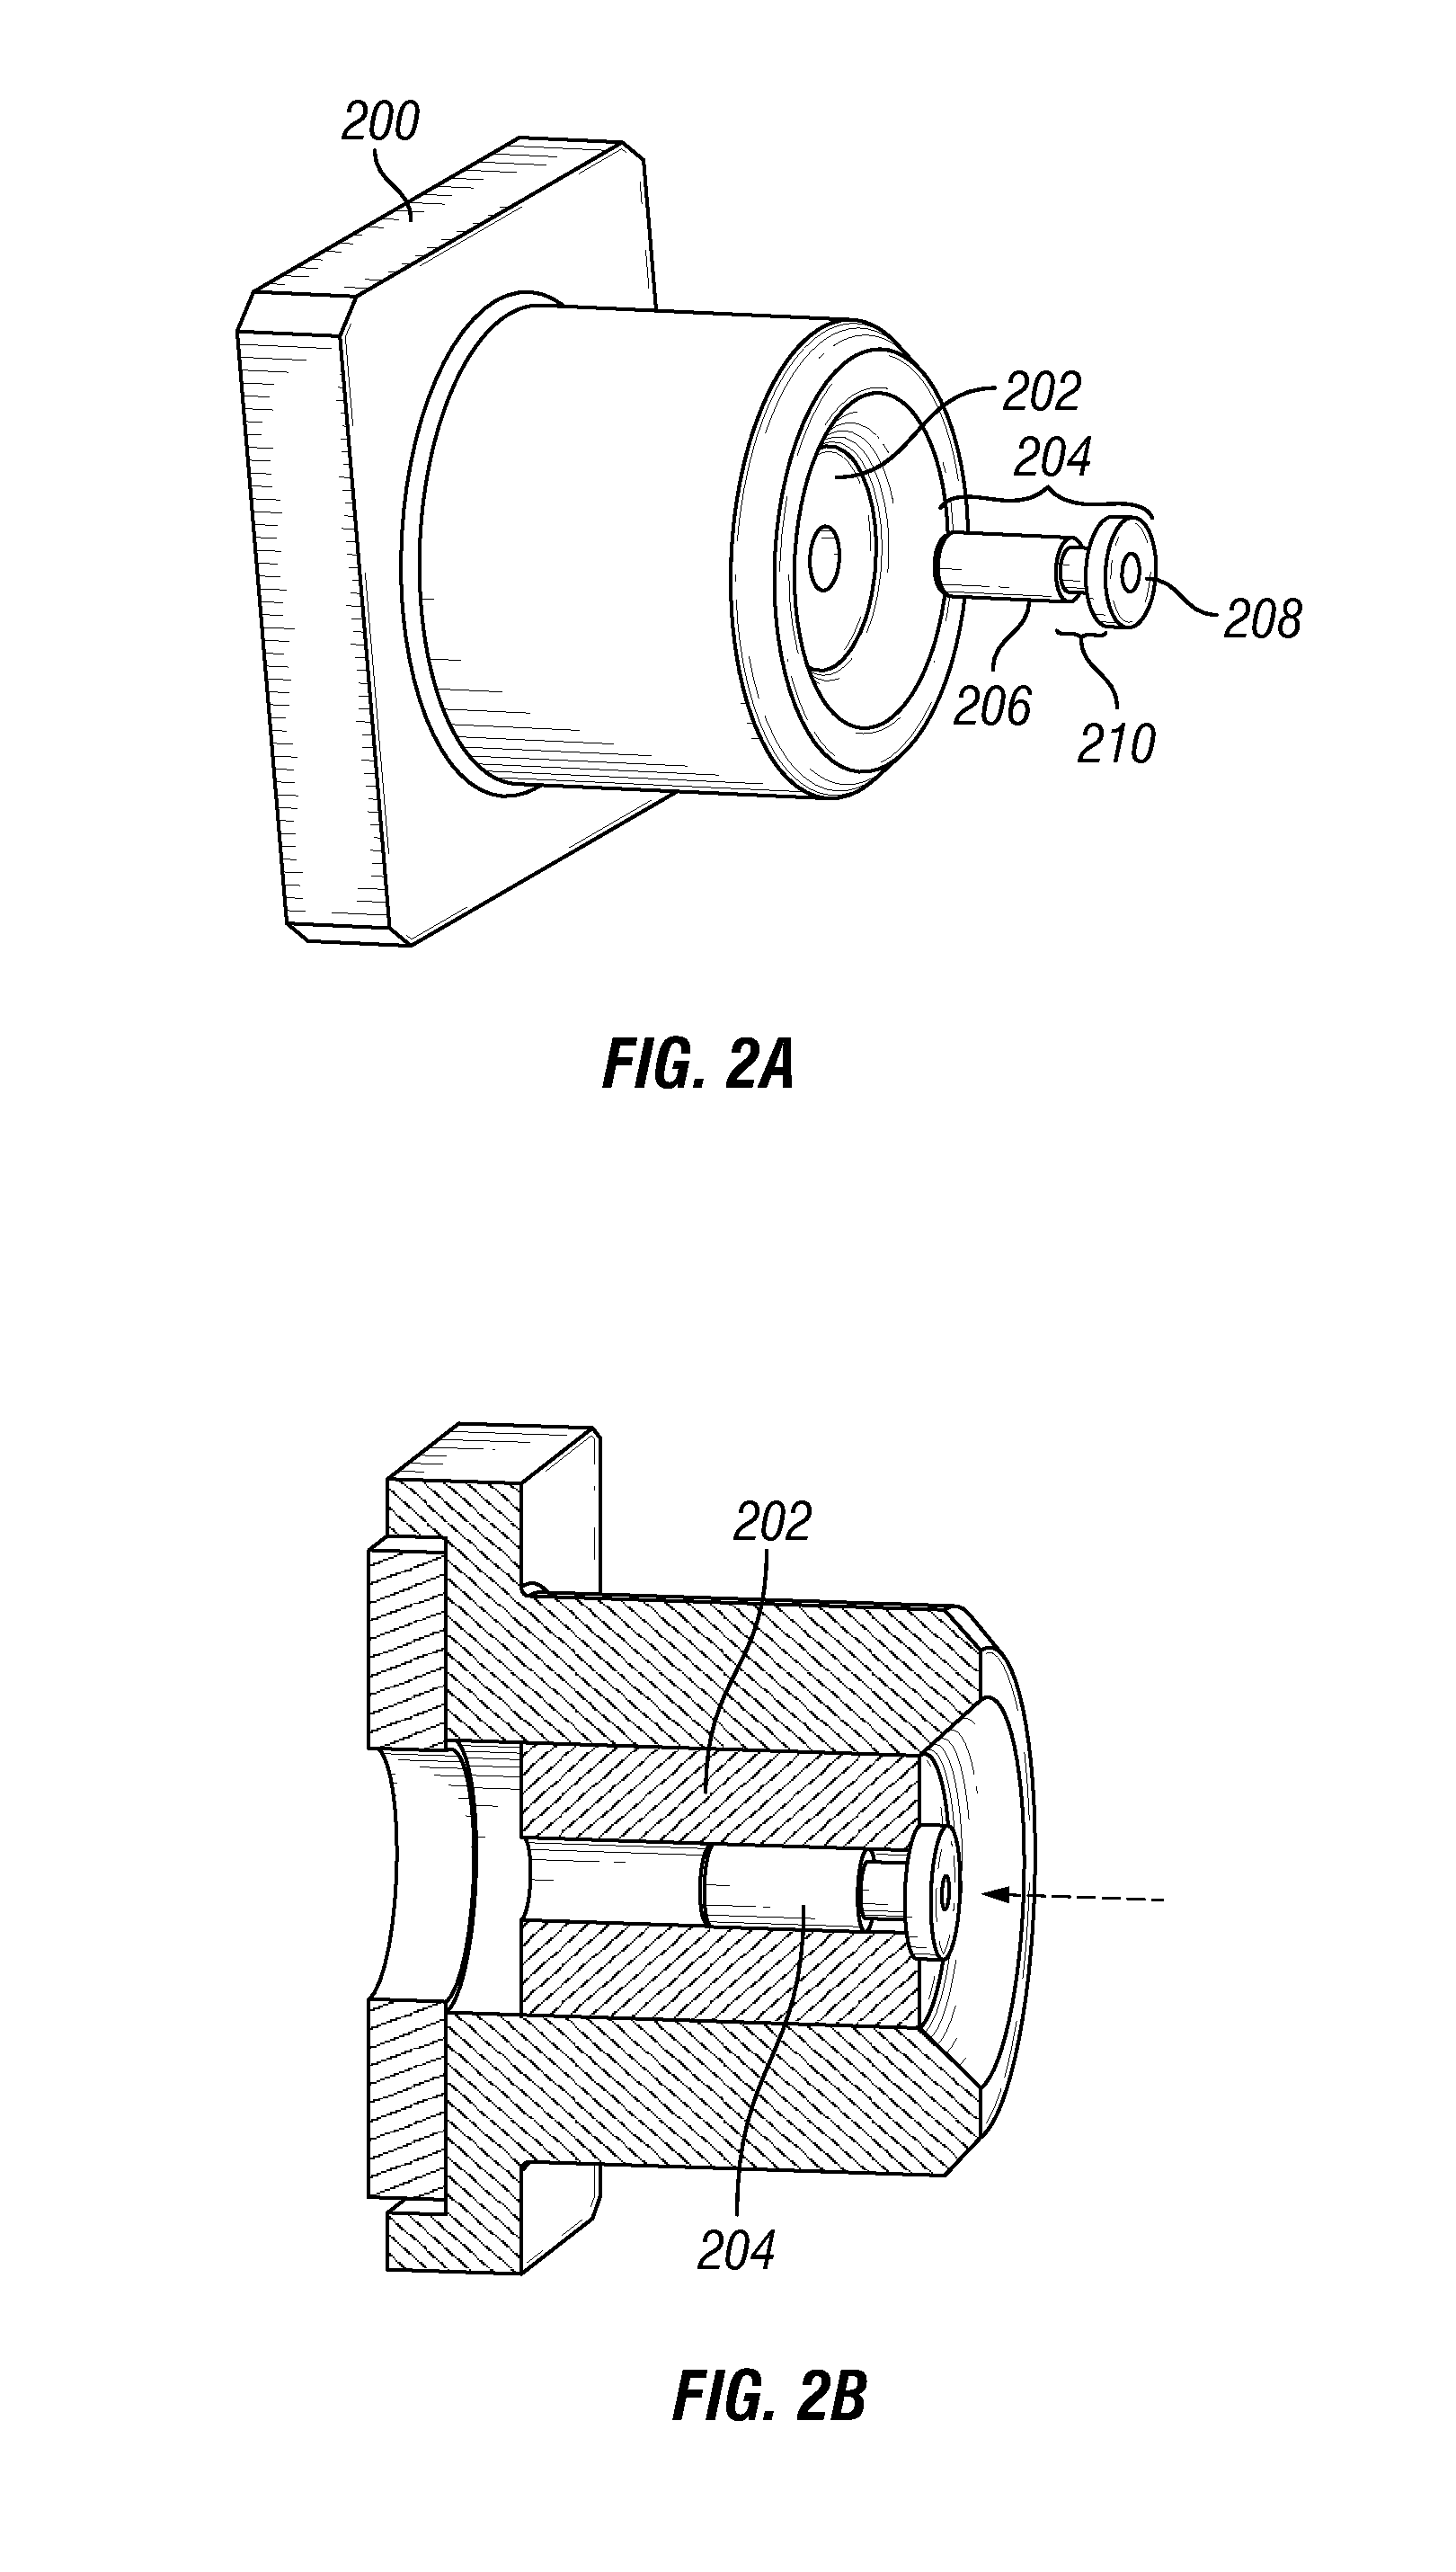 Pressure actuated flow control in an abrasive jet perforating tool